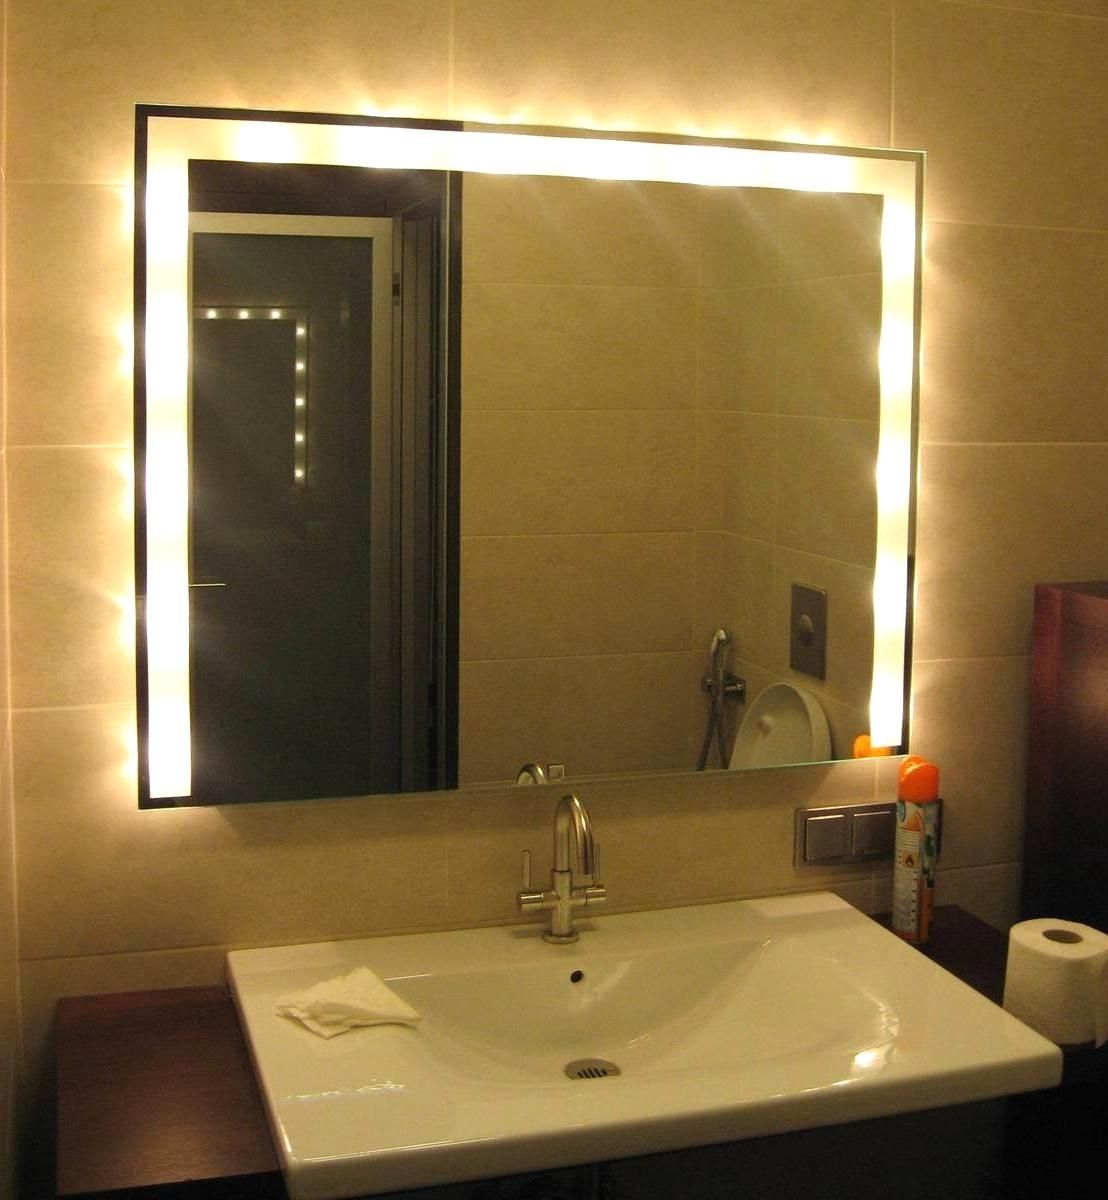 Led Lights For Mirrors With Best 25 Mirror Ideas On Pinterest Within Led Strip Lights For Bathroom Mirrors (View 18 of 20)